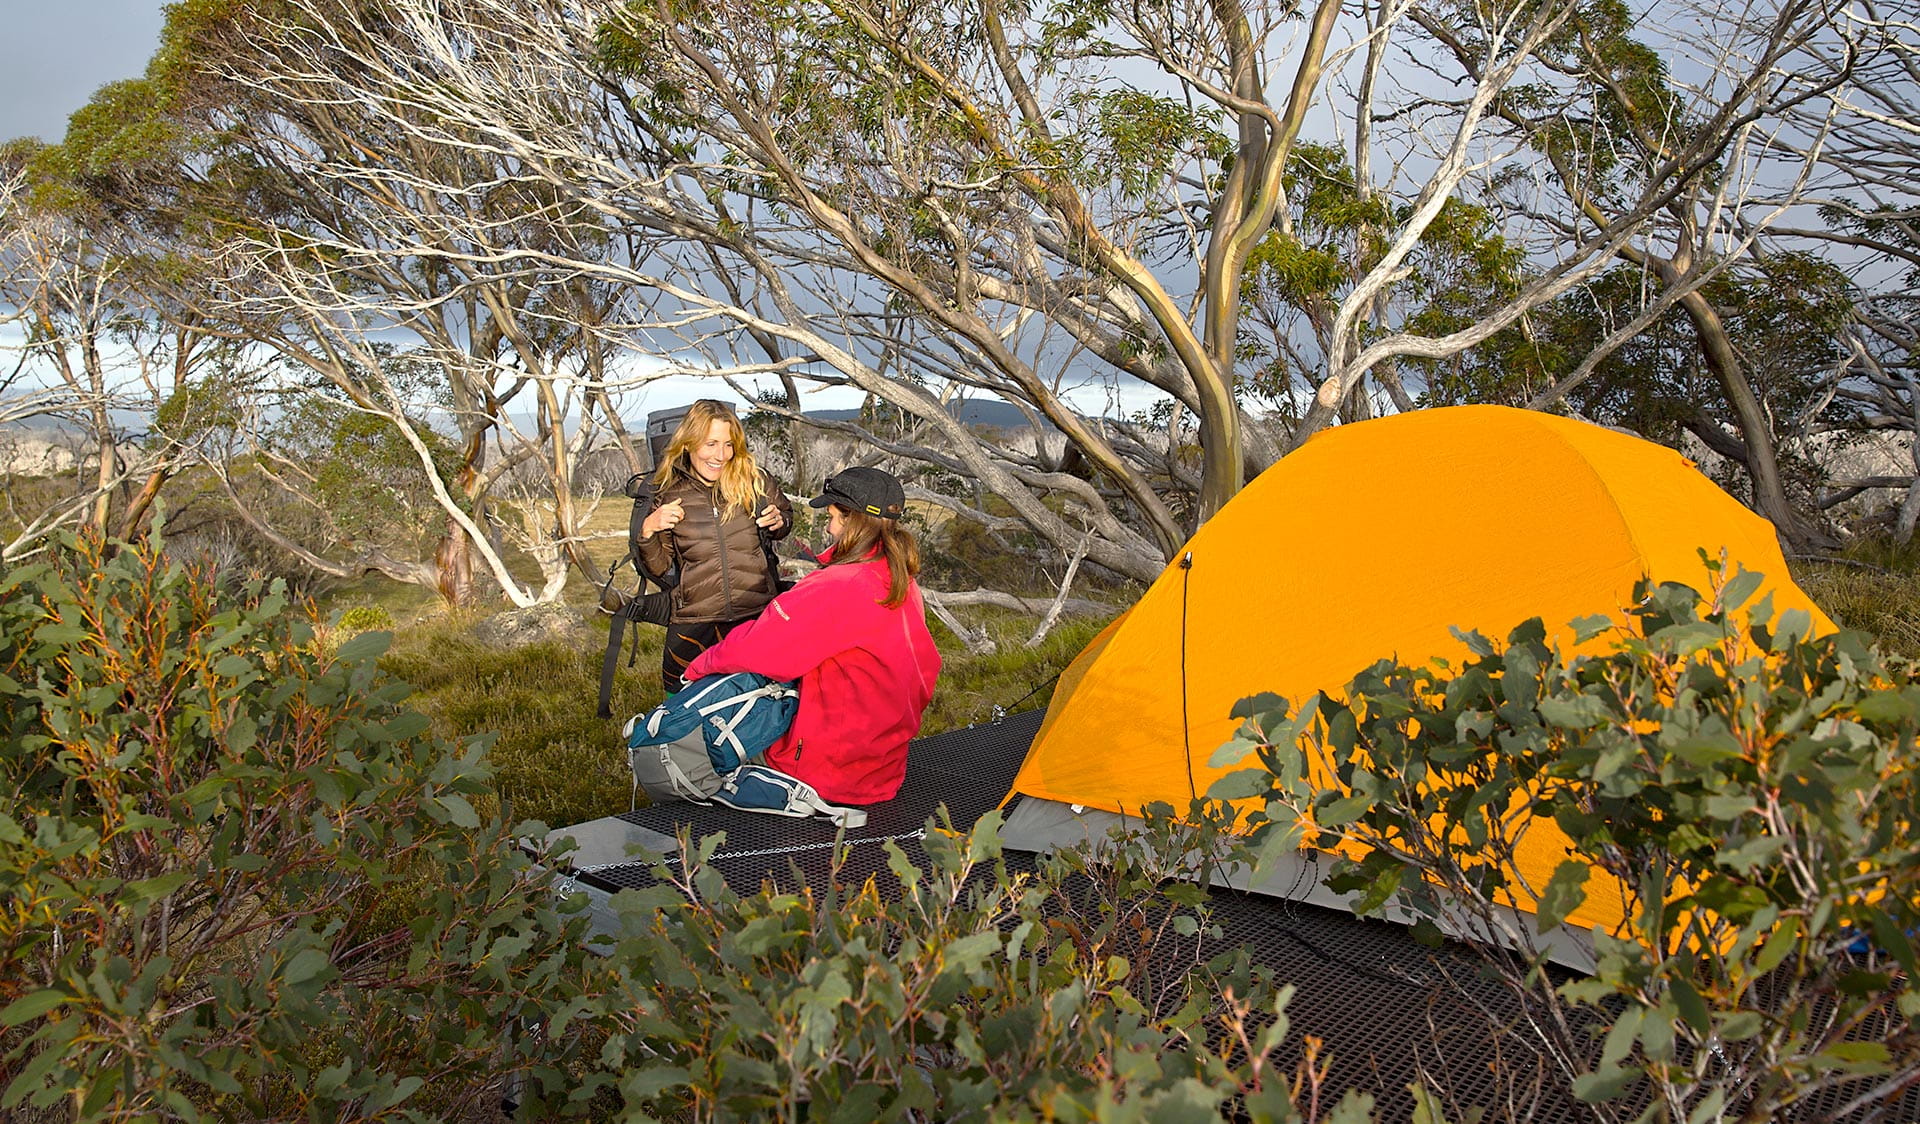 Two women chat next to an orange tent among snow gums in the Alpine National Park